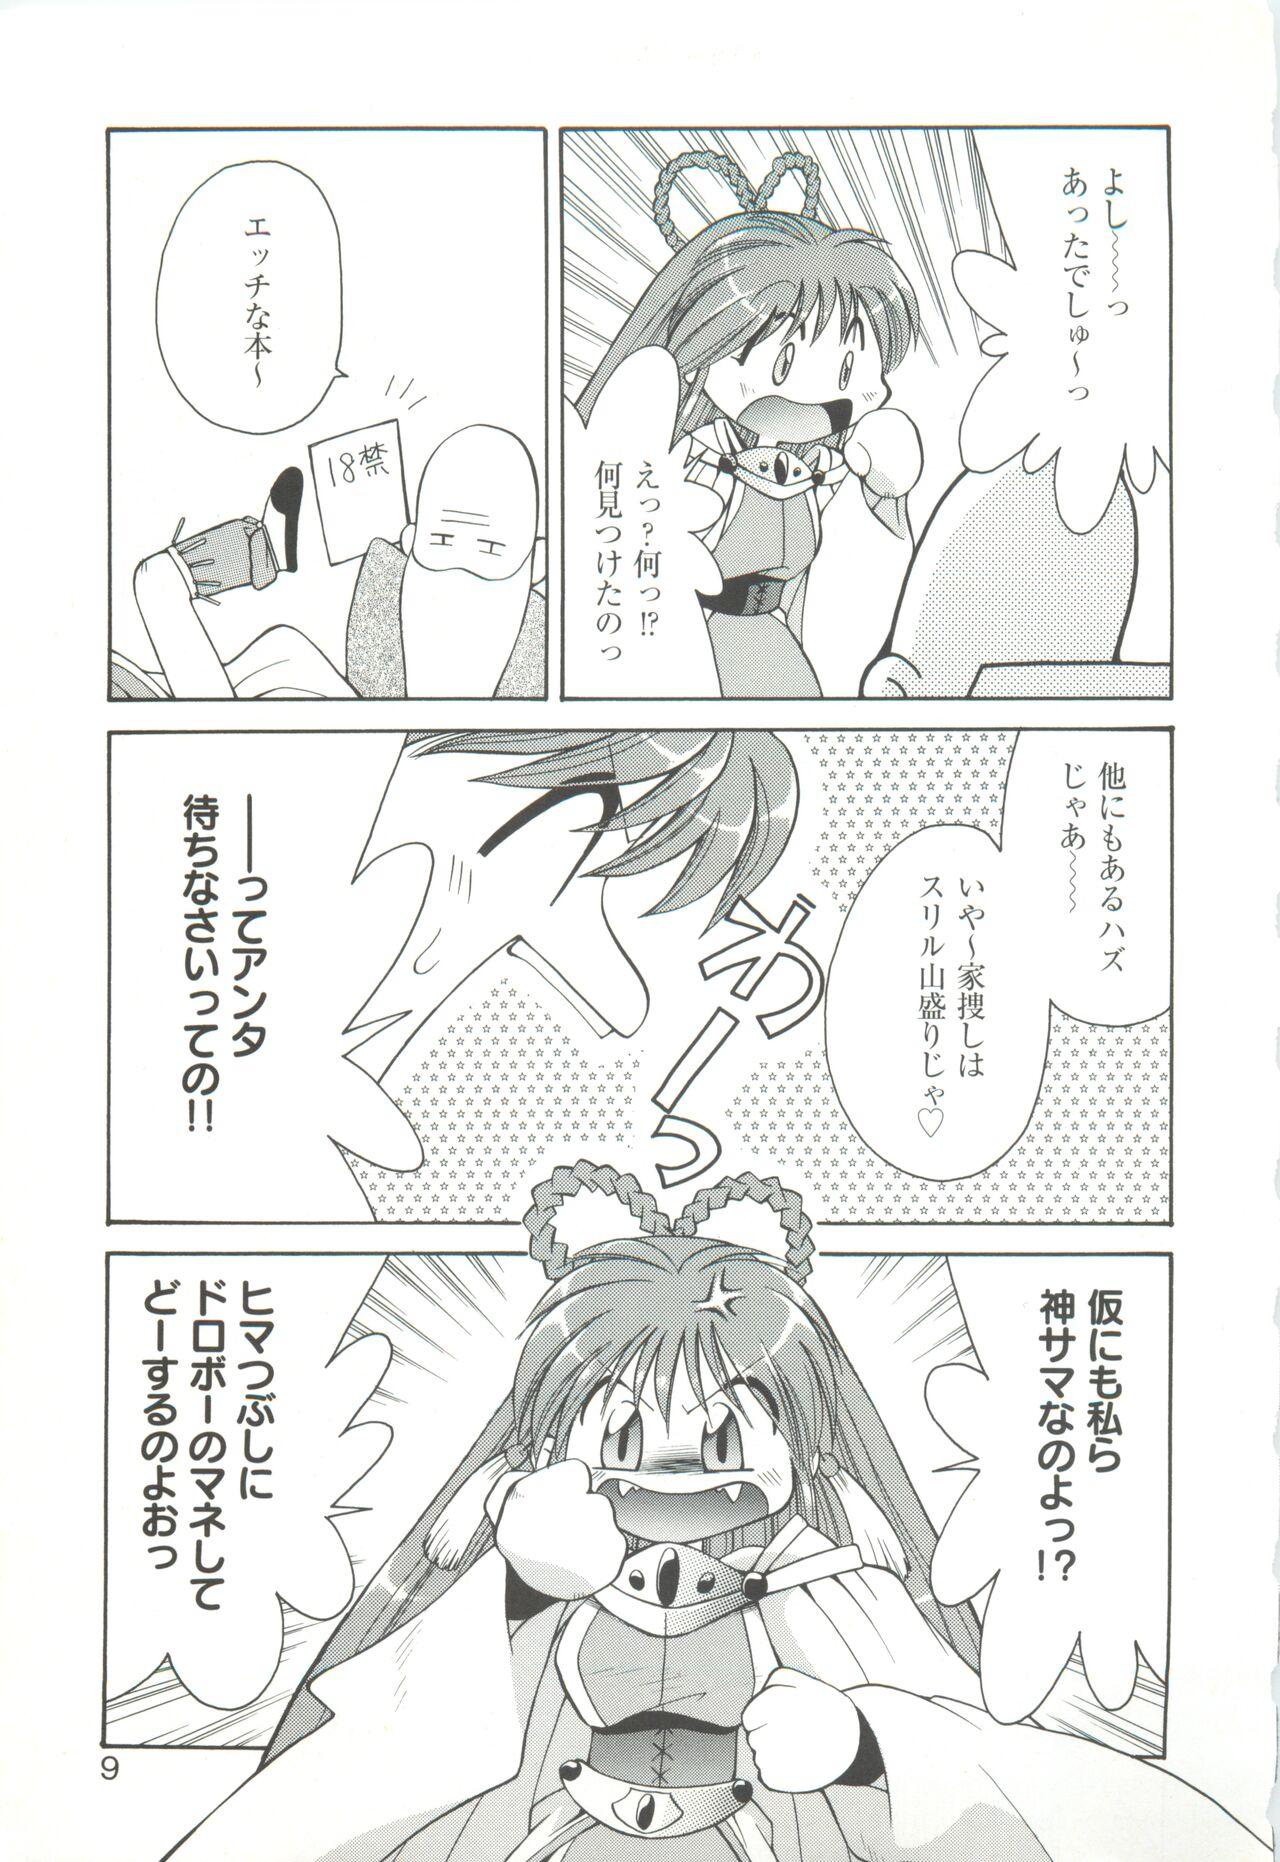 Anime Can Can Bunny Anthology Comic 2 - Can can bunny Amigo - Page 11